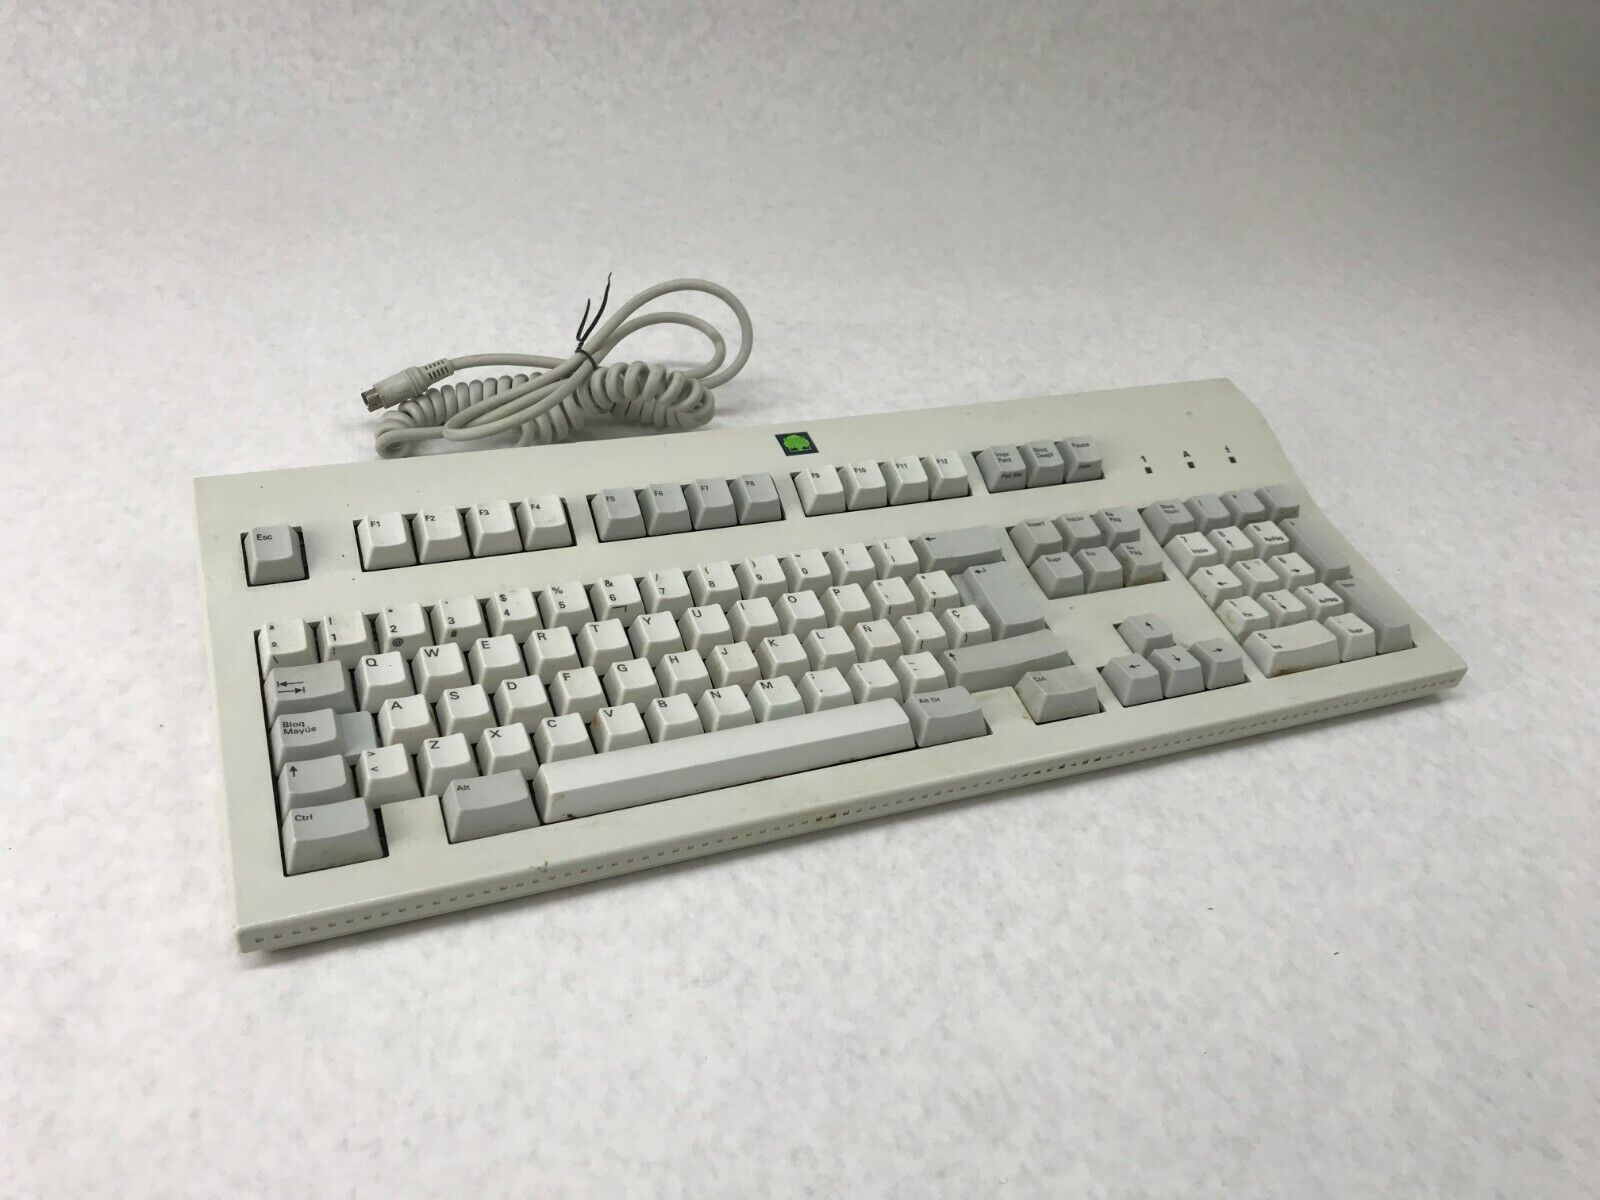 Zenith Data Systems Vintage PS/2 Keyboard IB-0060 163-0089-3E-00